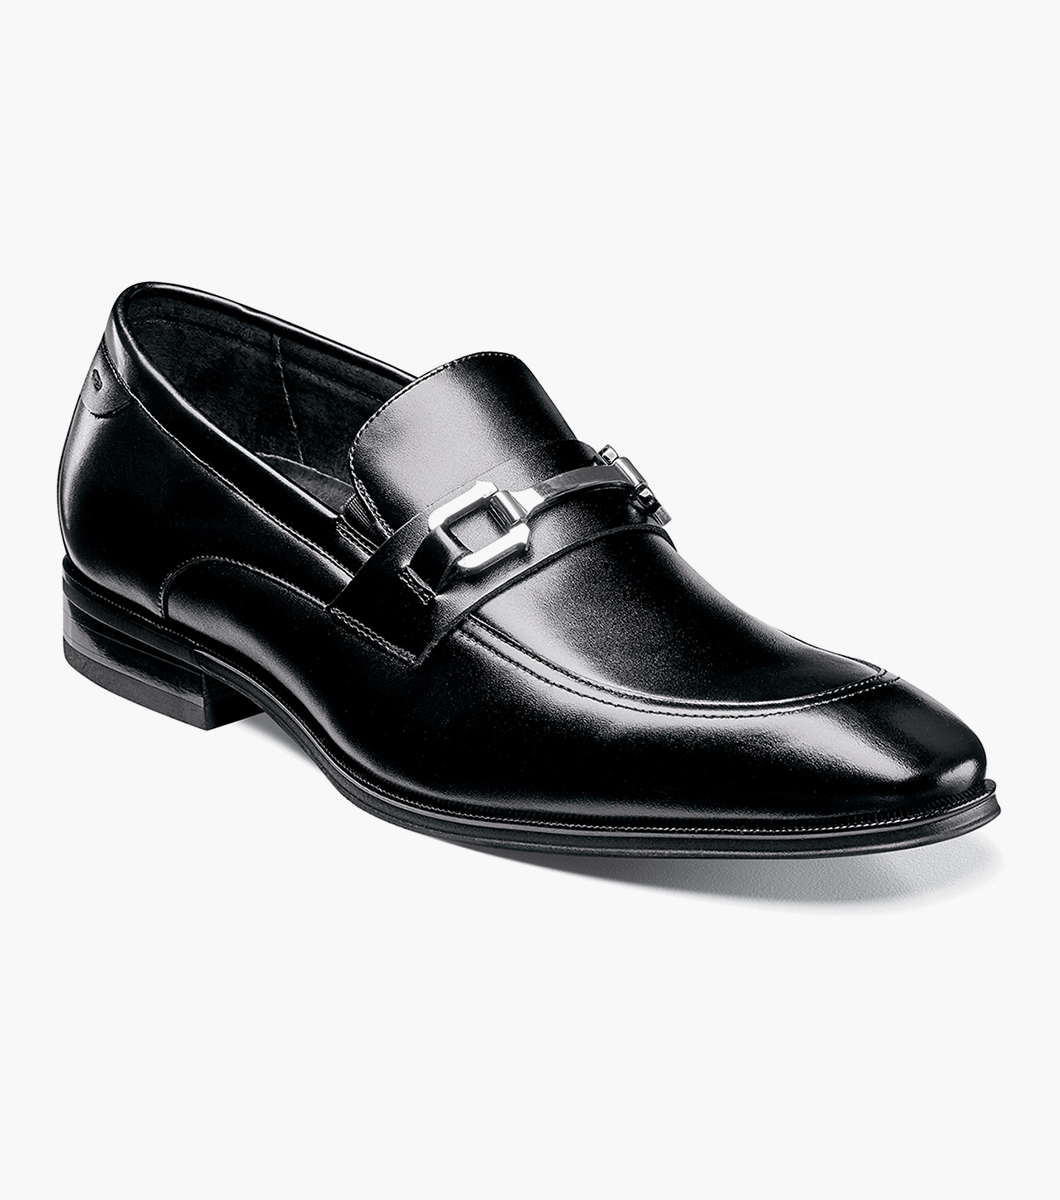 Stacy Adams Mens Faraday Slip-On Penny Loafer